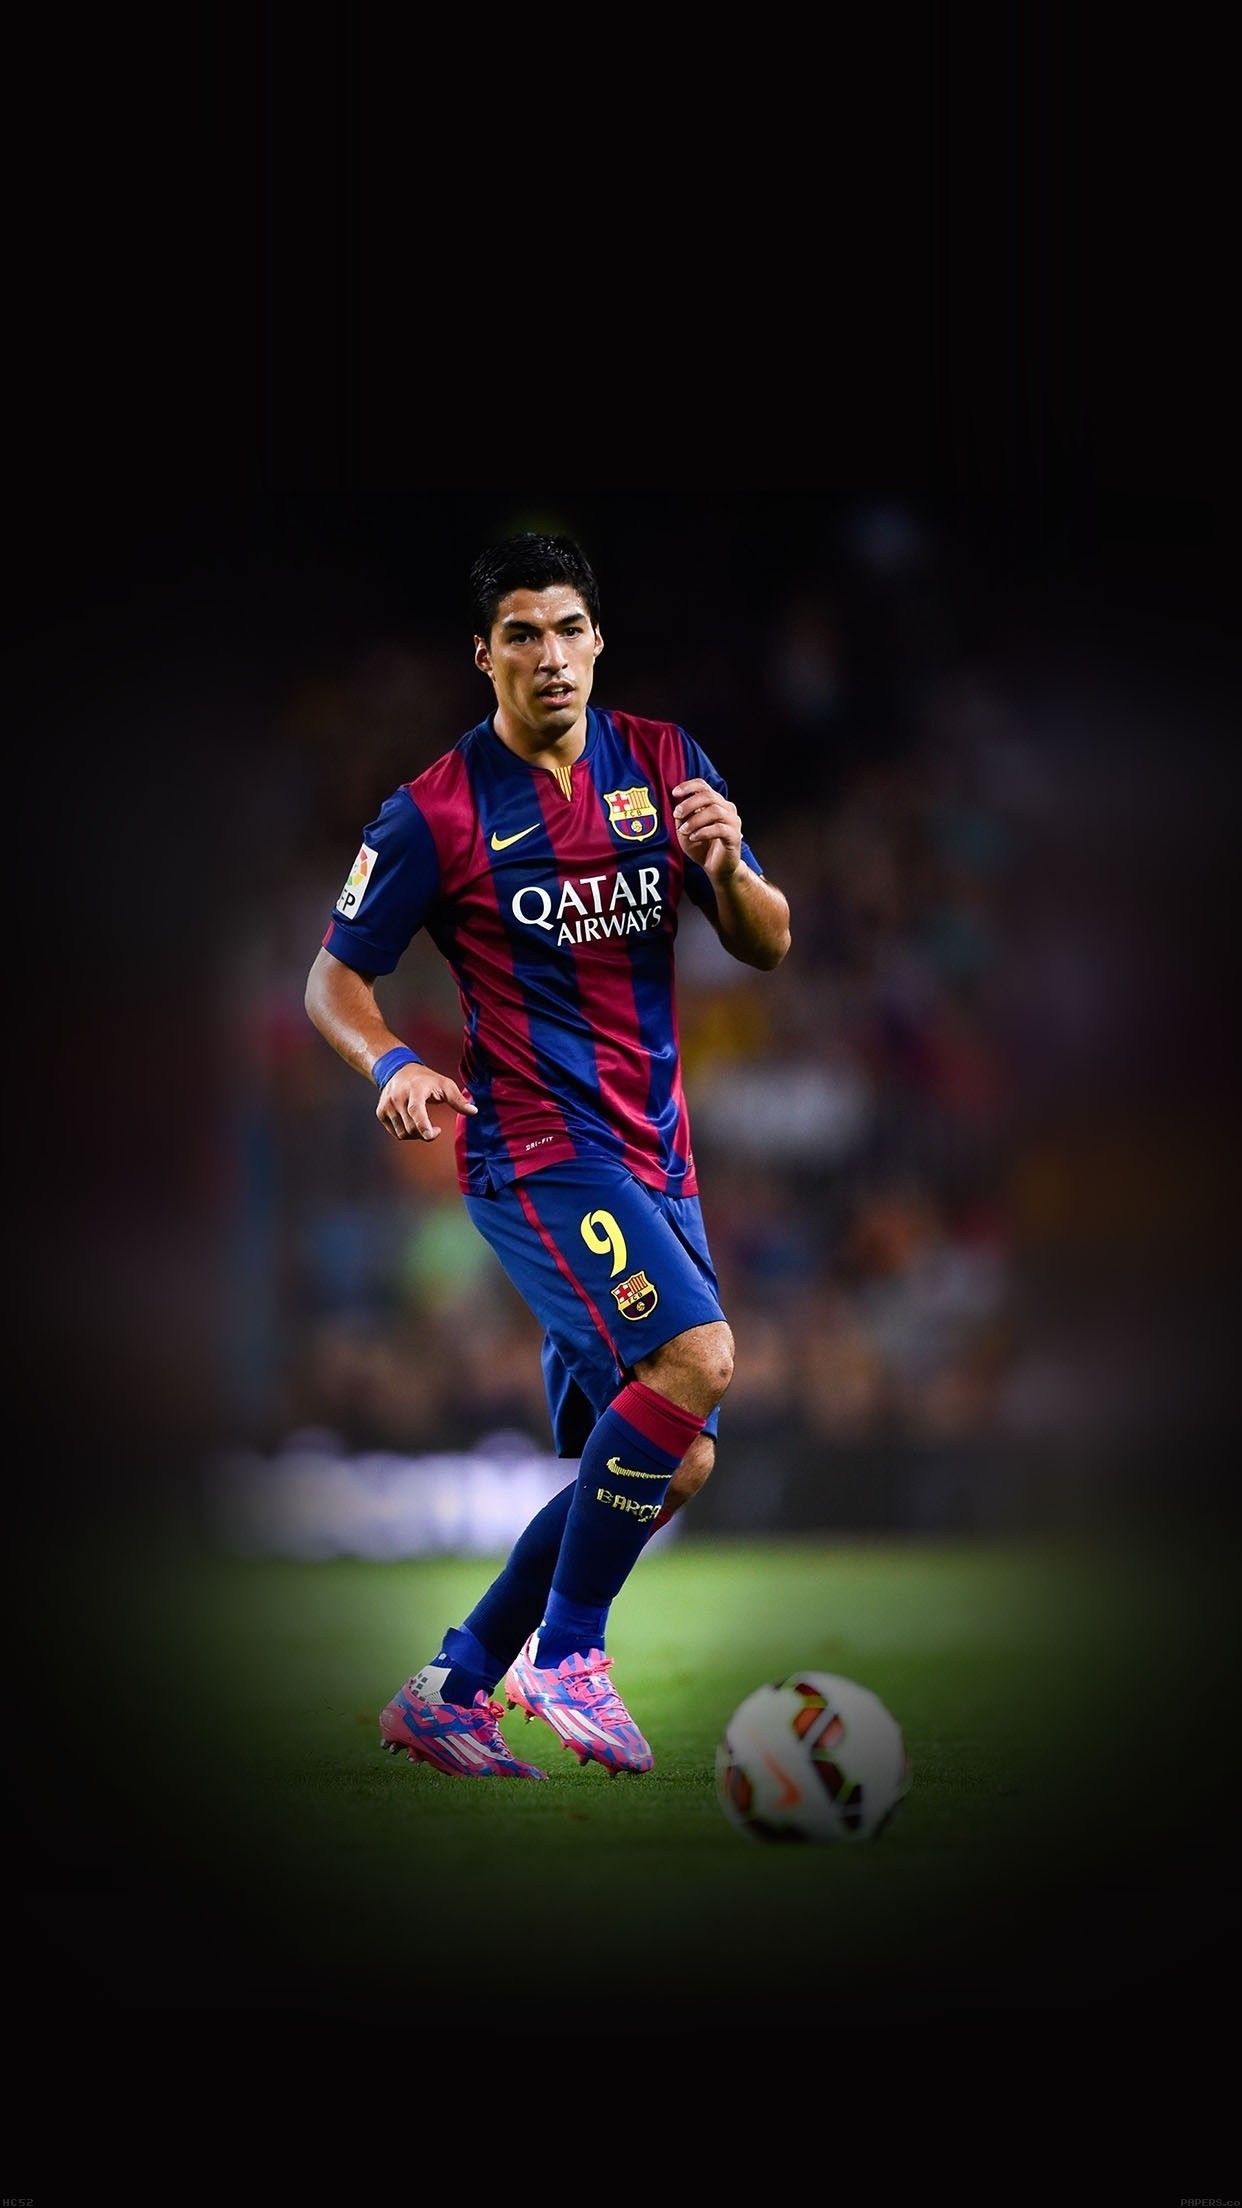 Wallpapers of Soccer Players (87+ images)